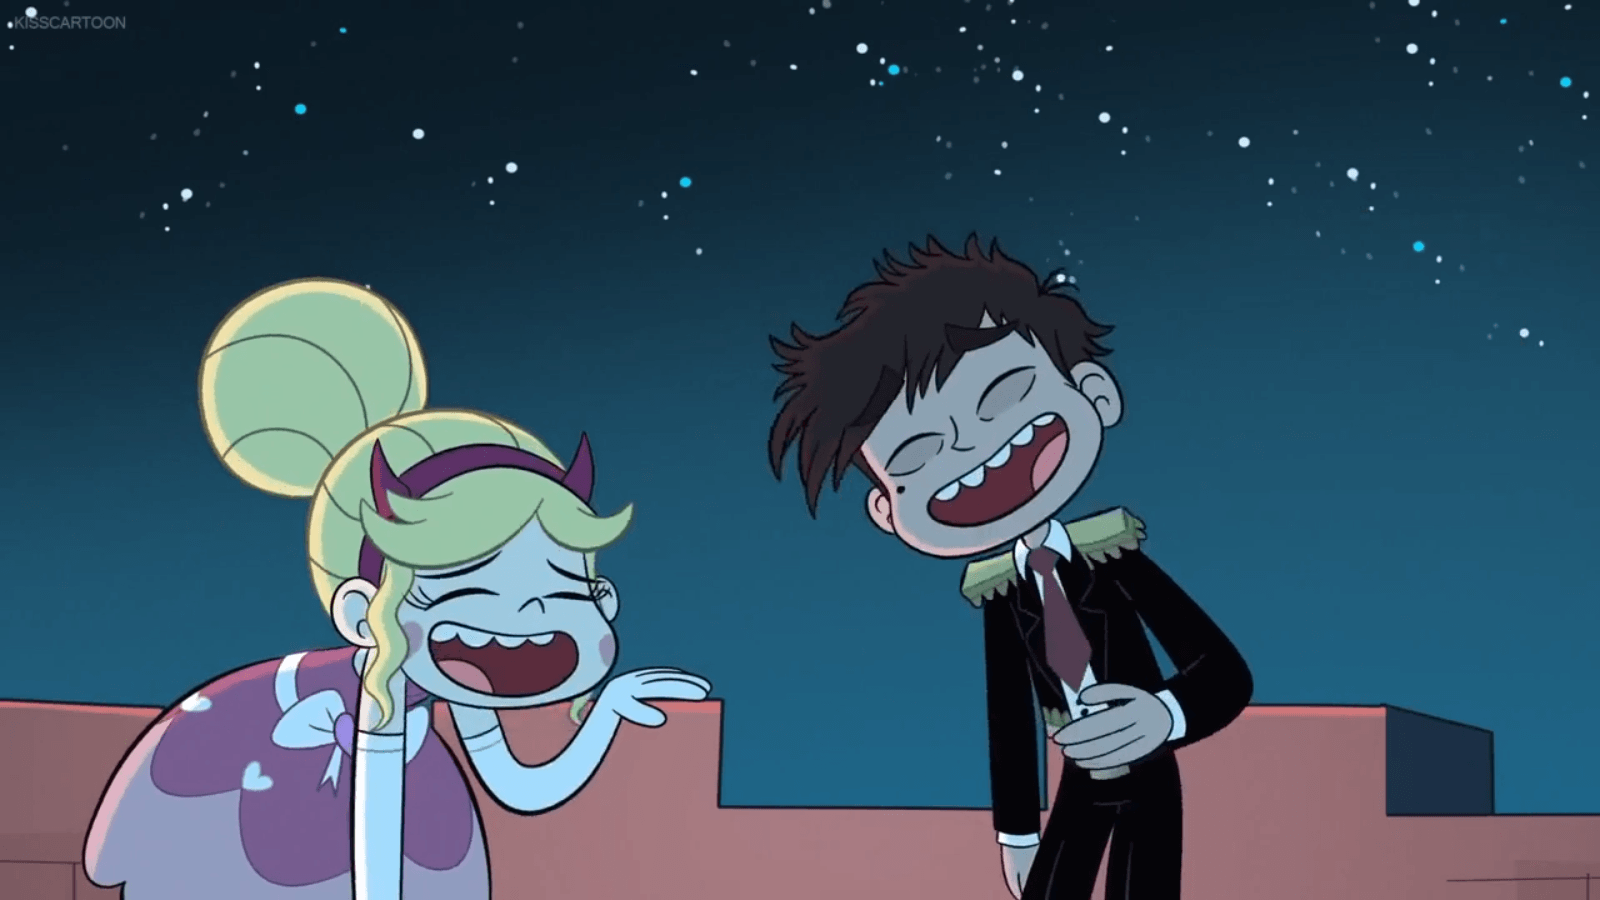 Star Vs. the Forces of Evil Wallpaper